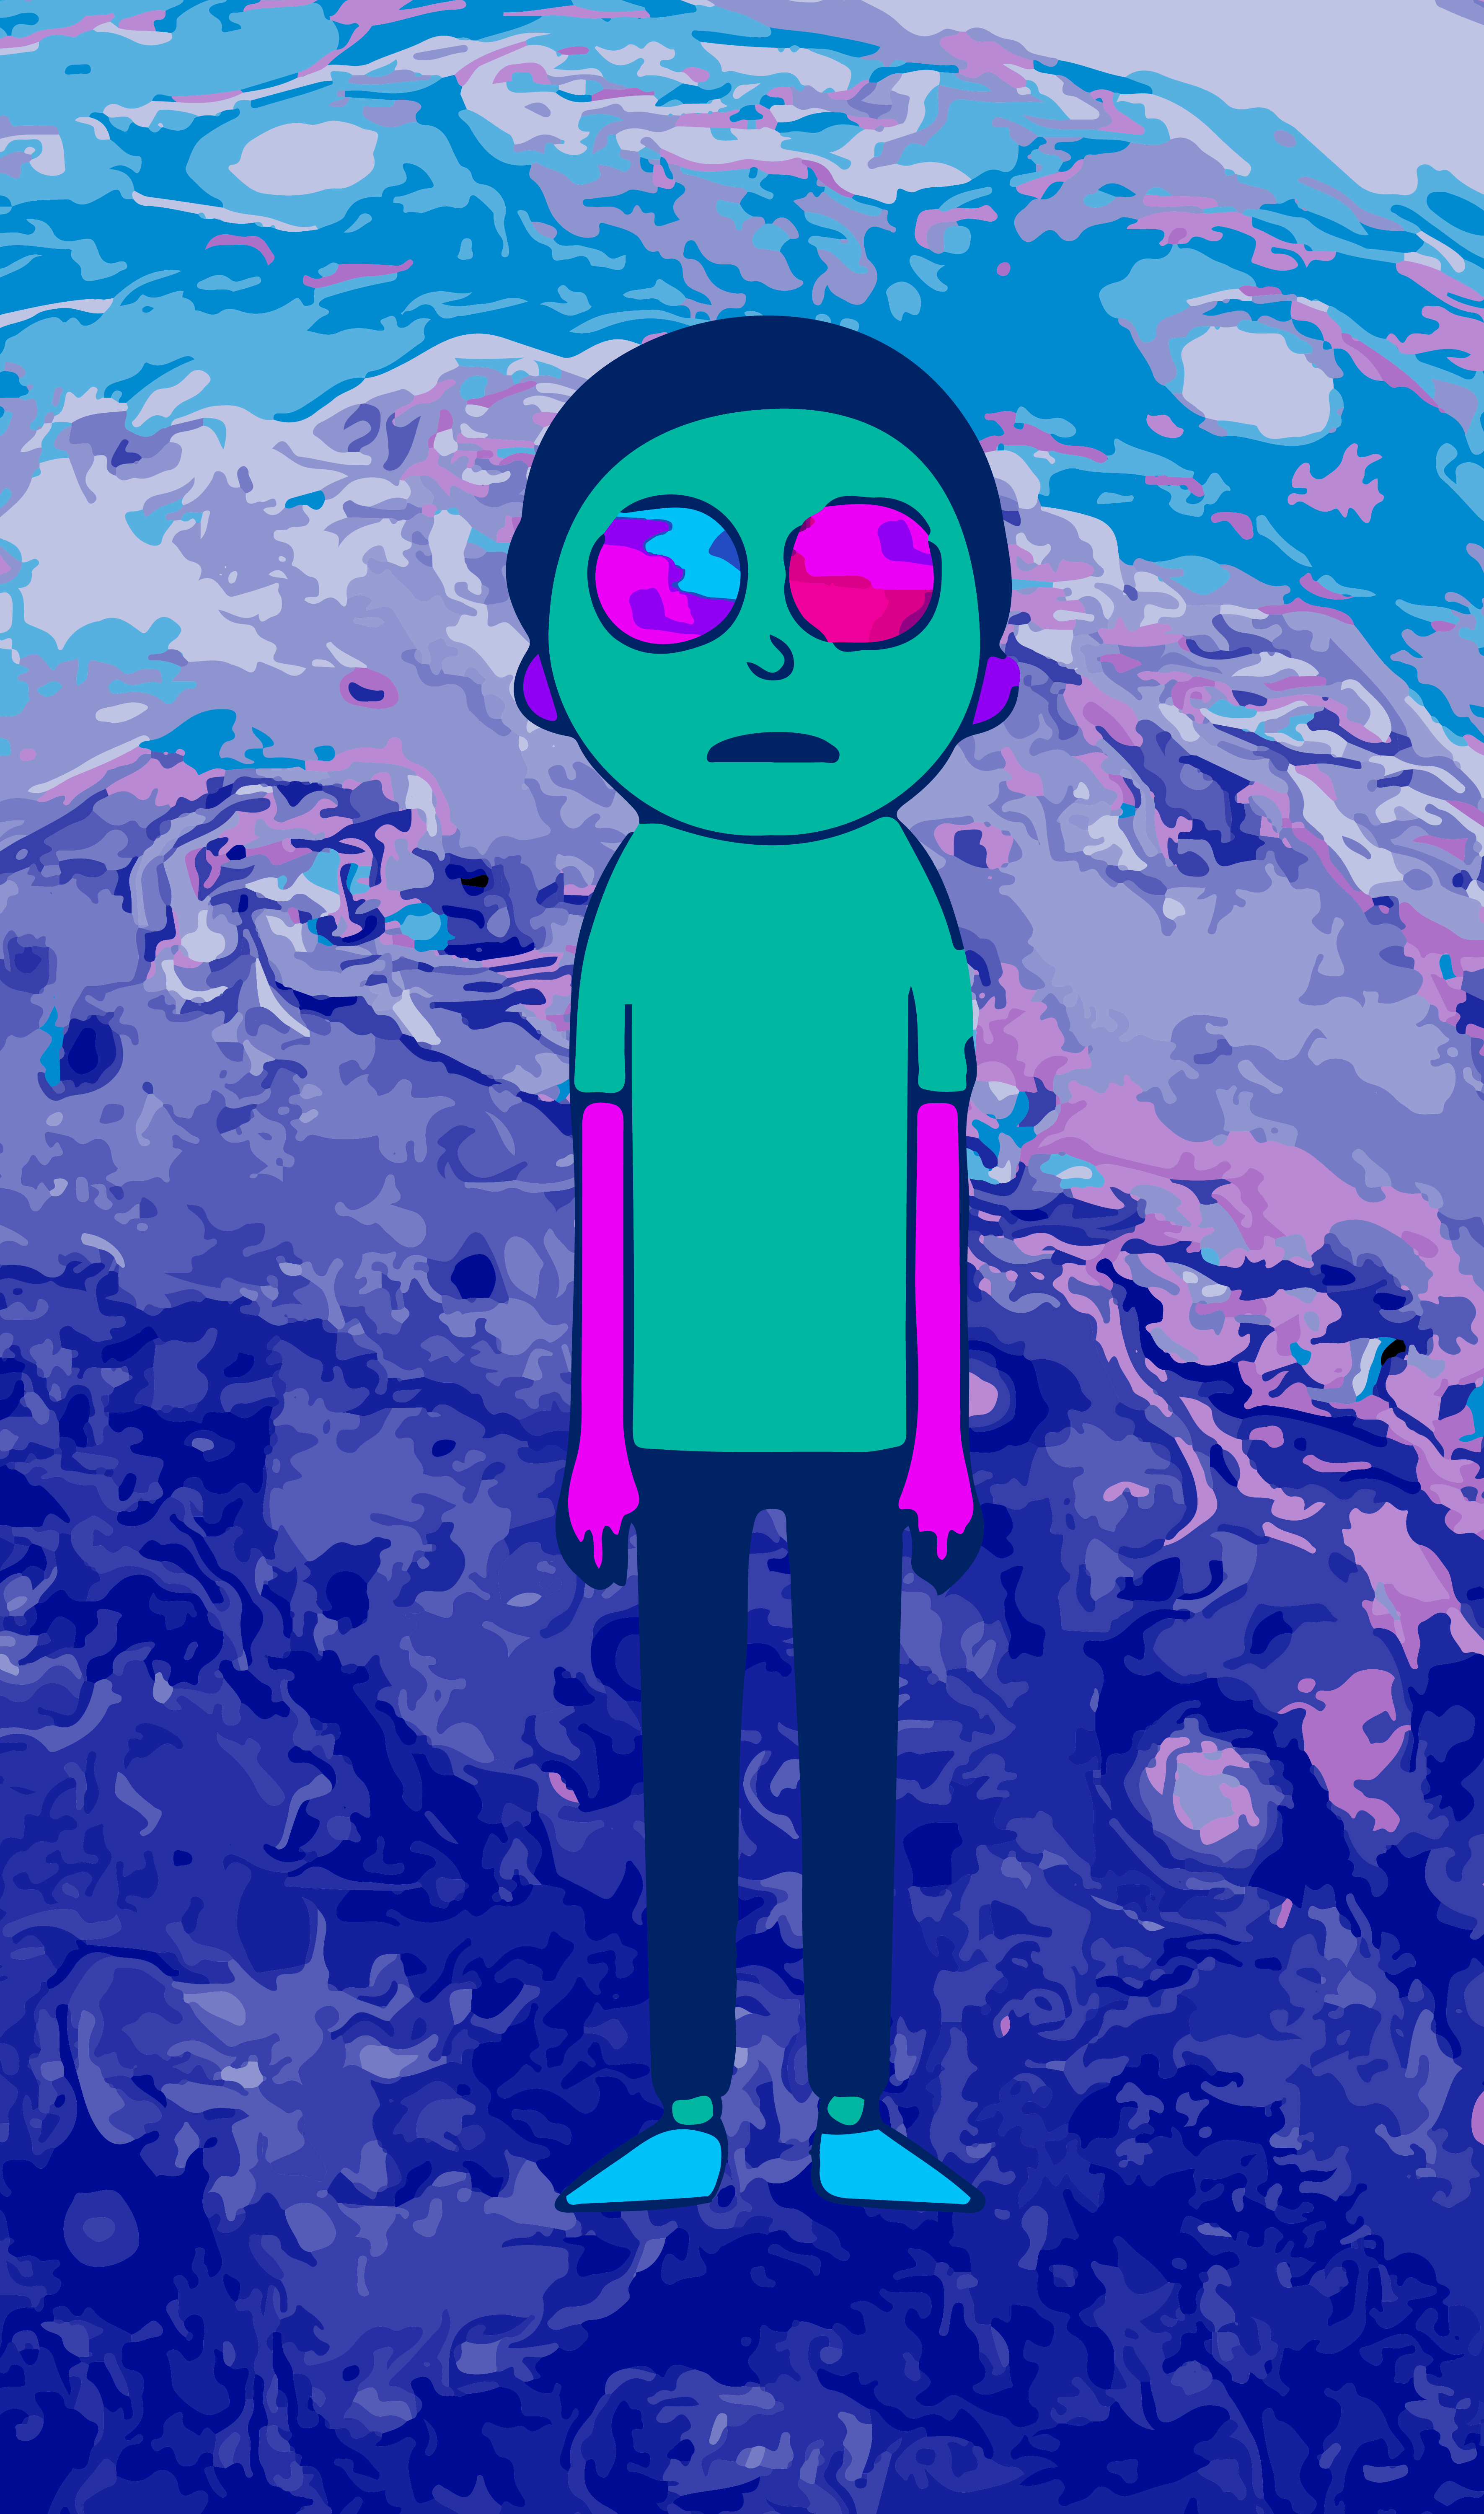 Free download Just made this morty phone background LSD [3542x6000] for your Desktop, Mobile & Tablet. Explore LSD Background. LSD Background, Lsd Wallpaper, Trippy LSD Wallpaper